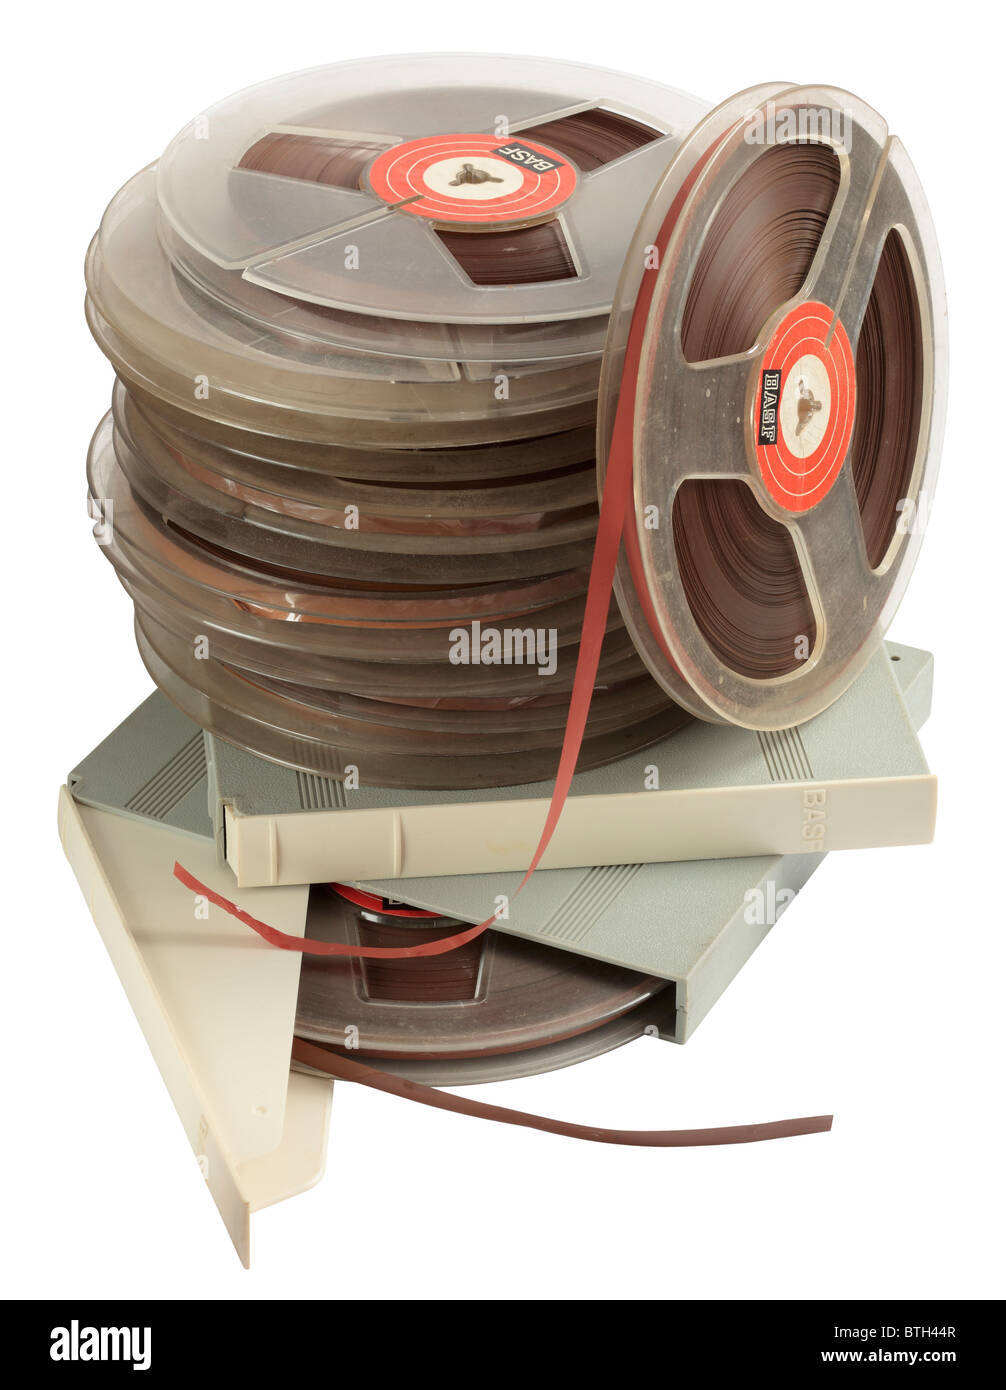 Old reel to reel magnetic recording tapes Stock Photo